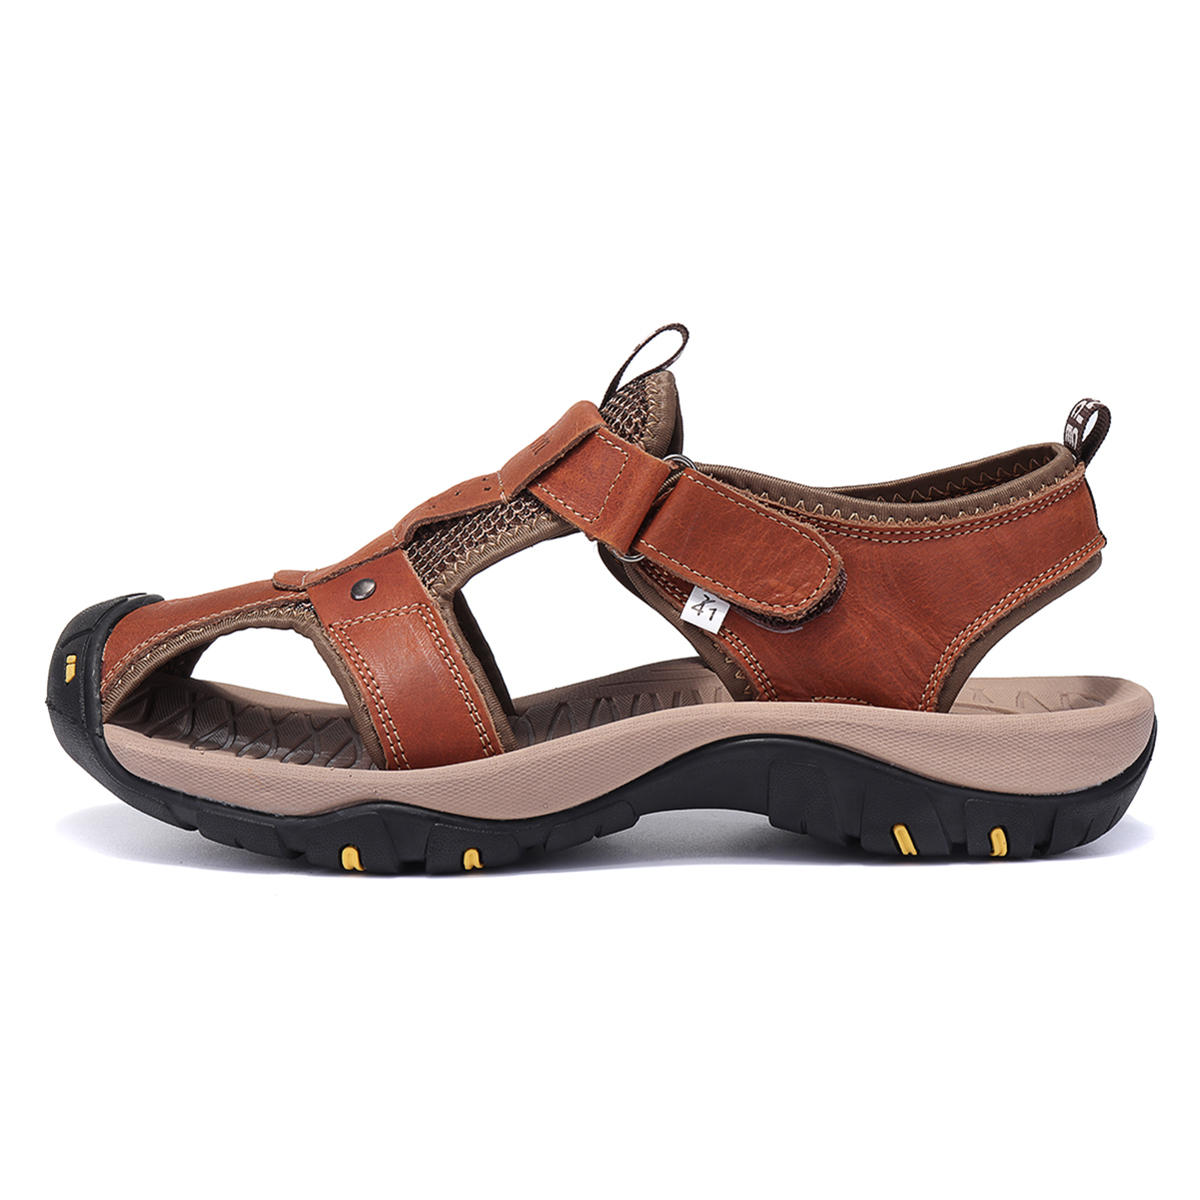 Men's Genuine Leather Roman Sandals Soft Sole Cut-out Moccasins Outdoor Beach Sneakers Casual 